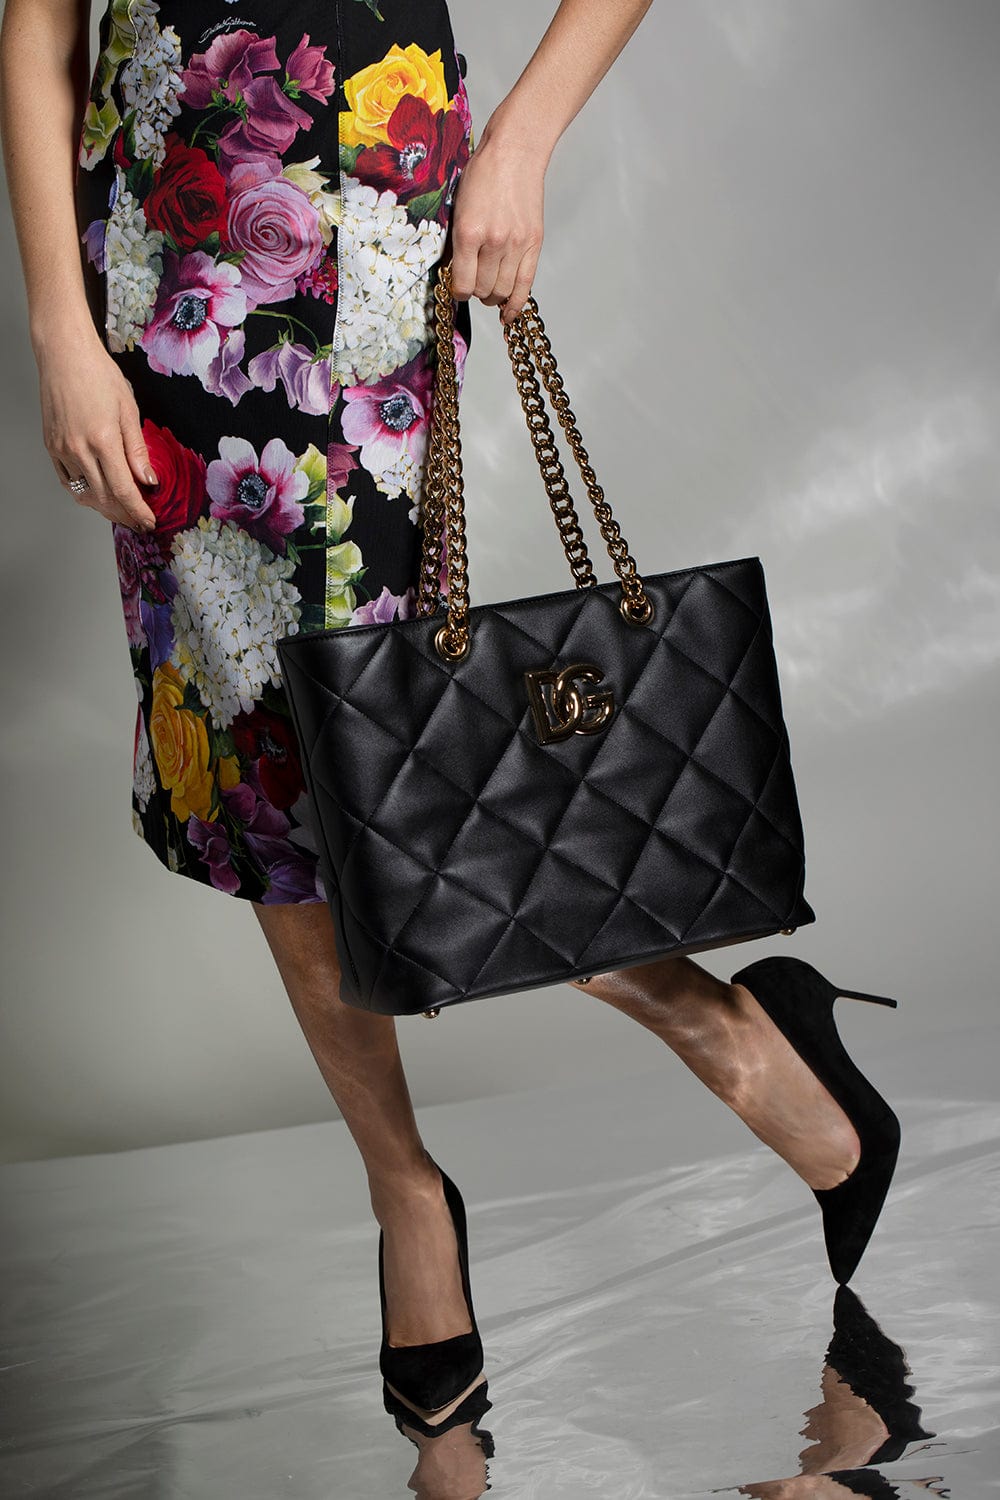 DOLCE & GABBANA-Quilted Tote With Chain Straps-NERO